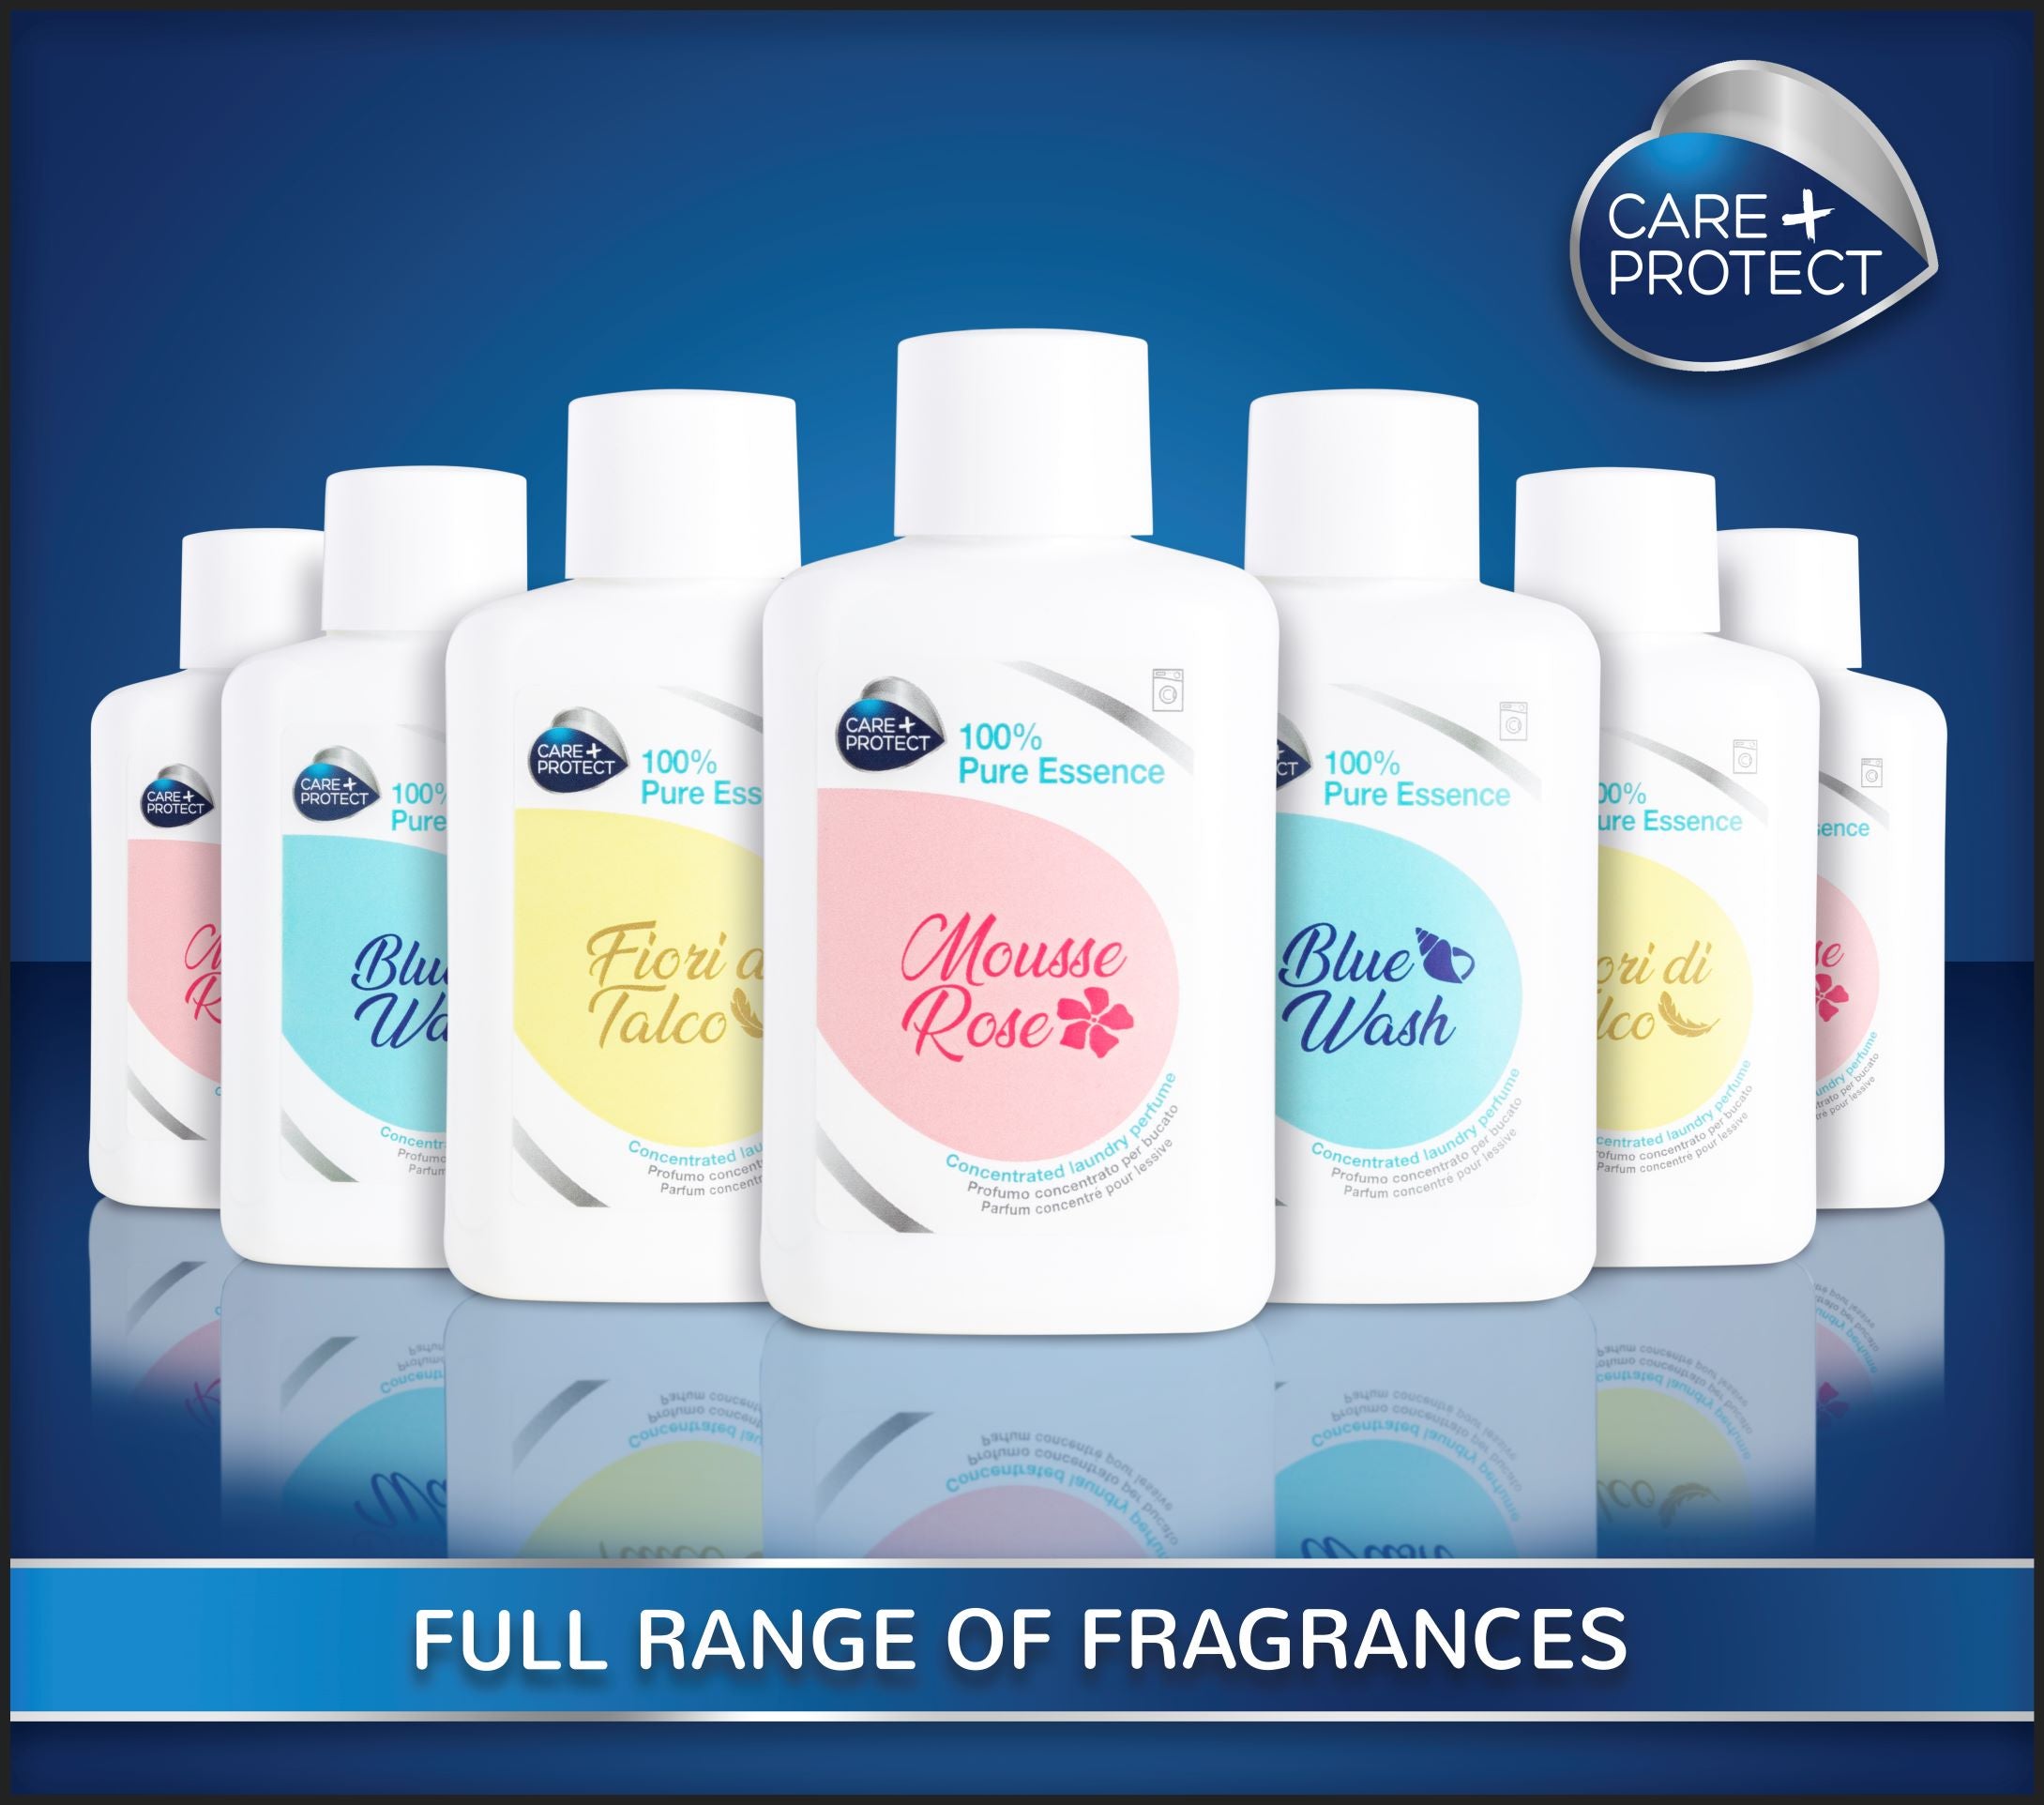 Care+Protect Laundry perfume: buy 4 and get 25% discount